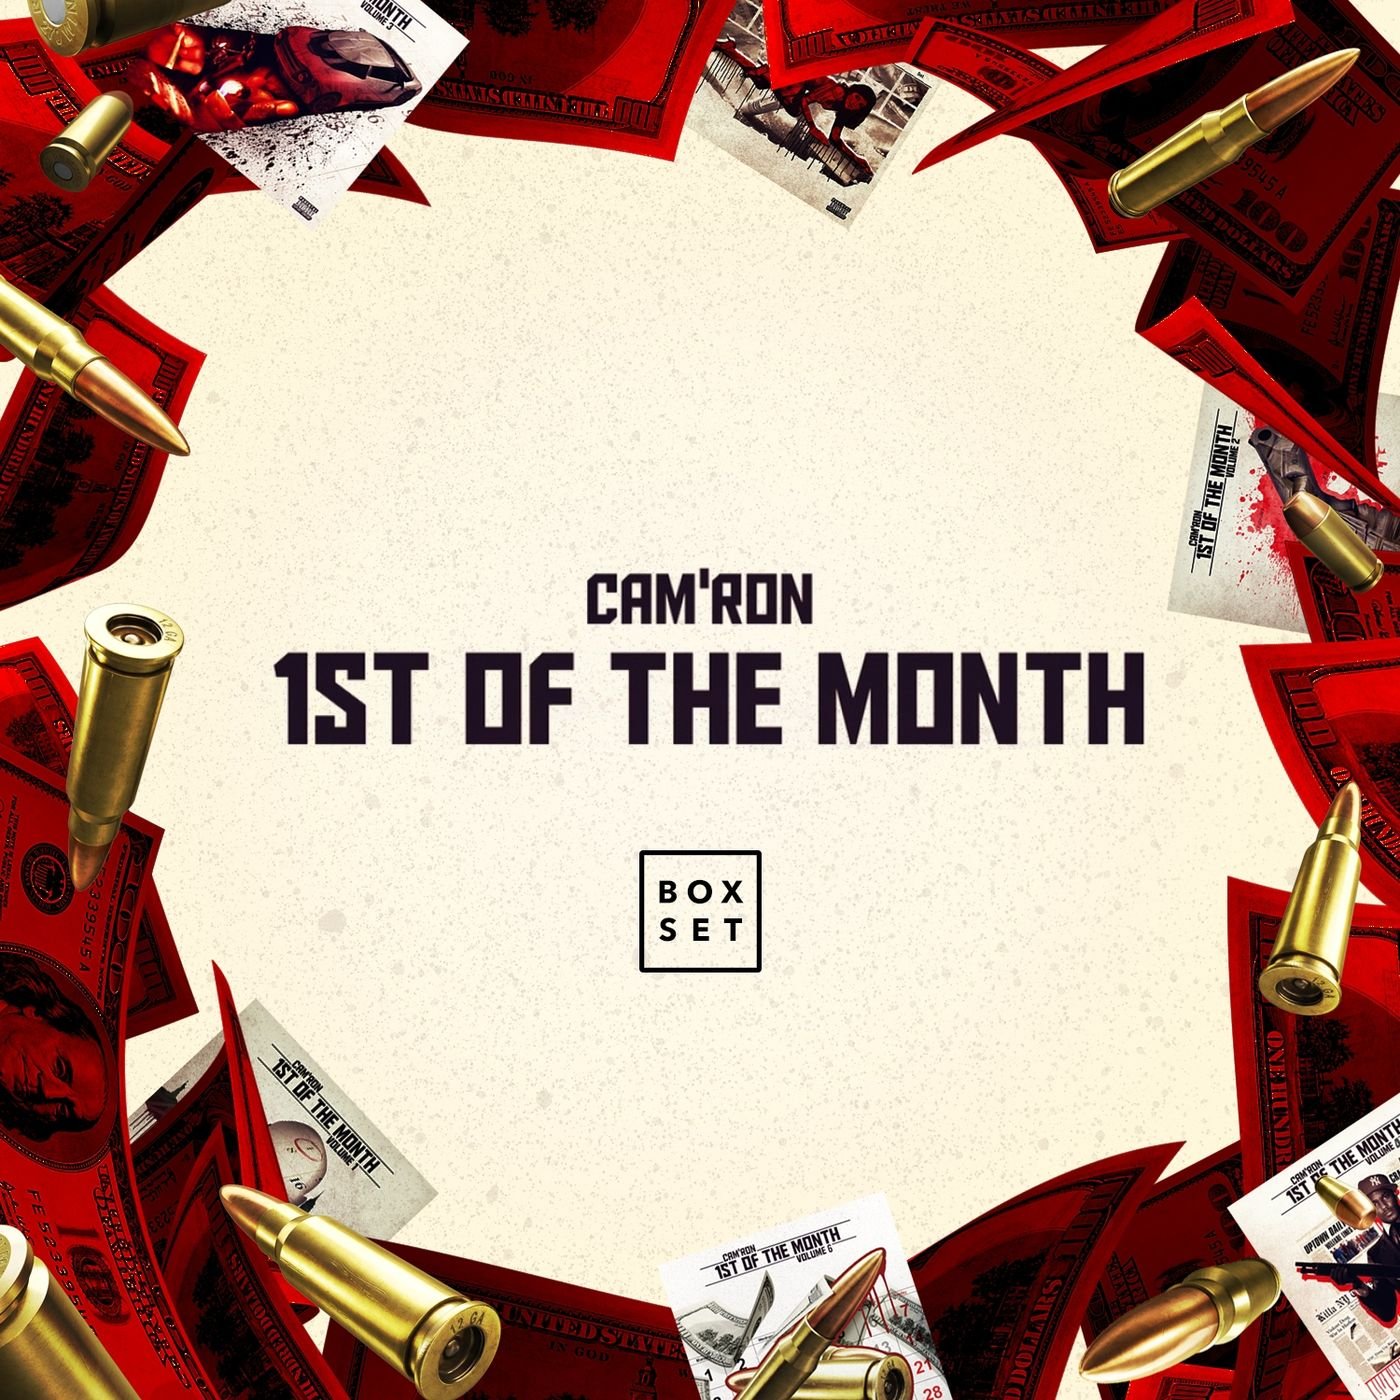 Cam'ron - 1st Of The Month (2014) FLAC Download